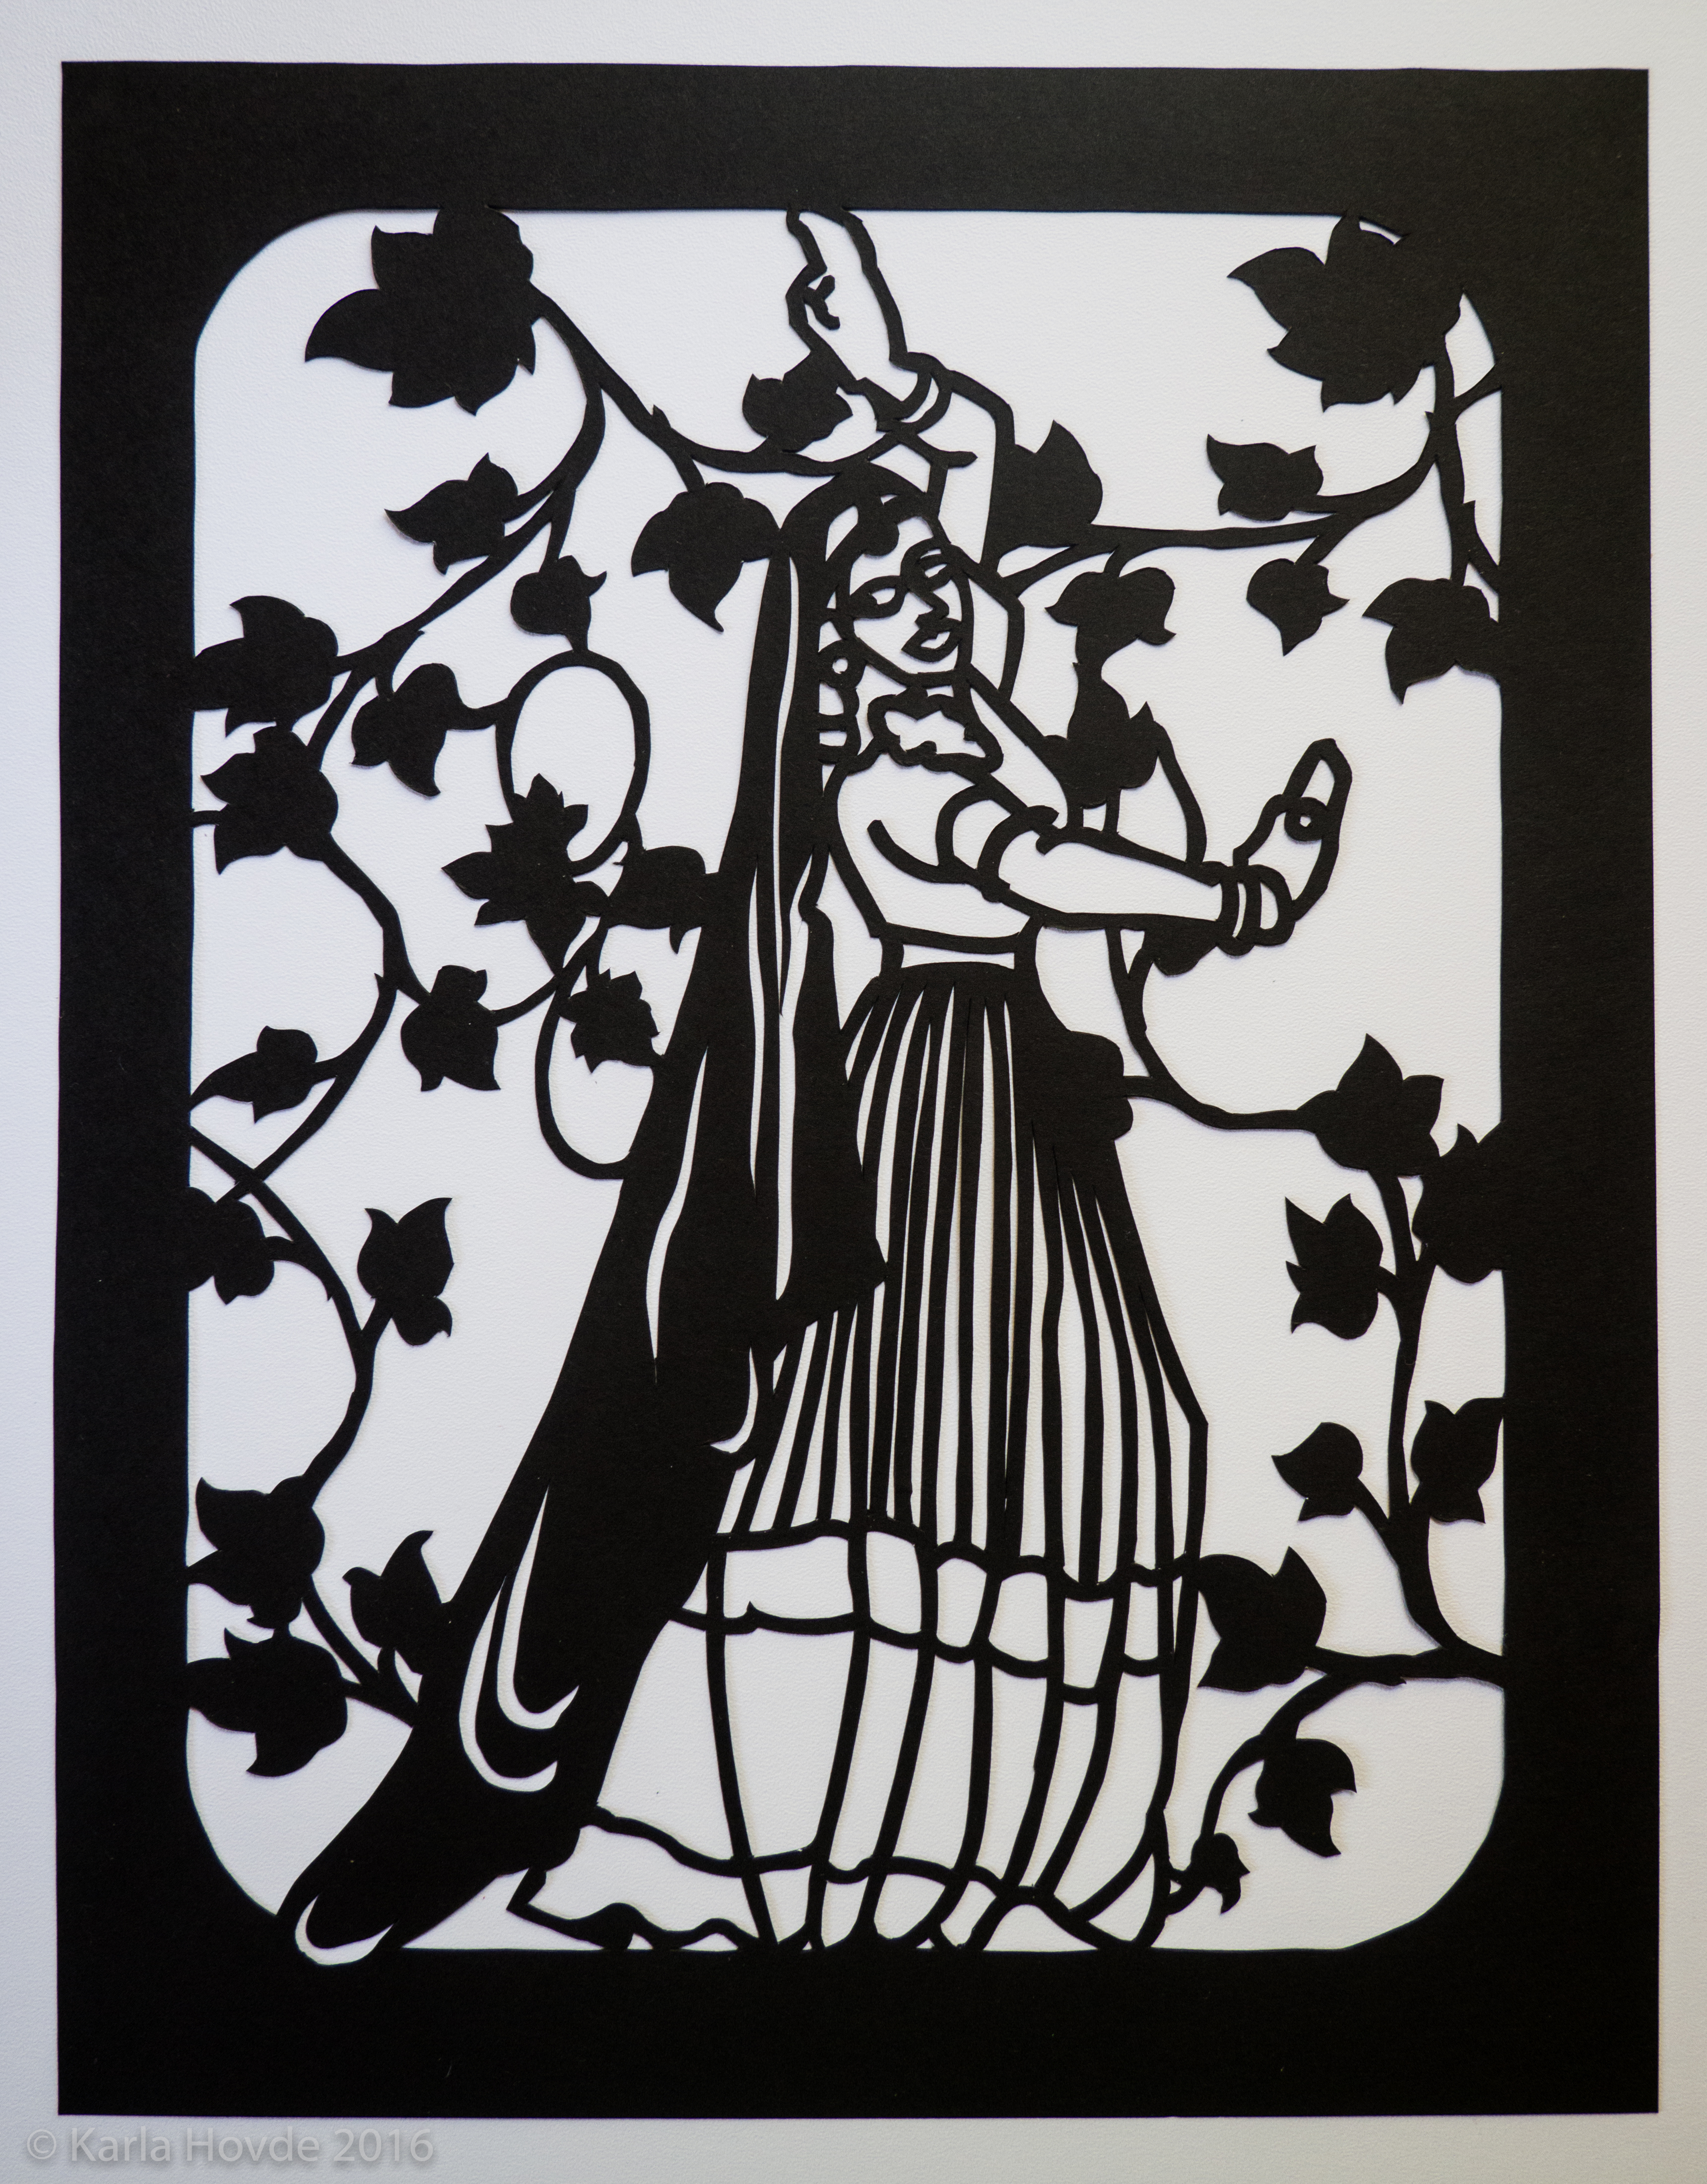 Paper cutting art in black paper shows stylized woman wearing a sari and dancing in front of delicate ivy leaves pattern.